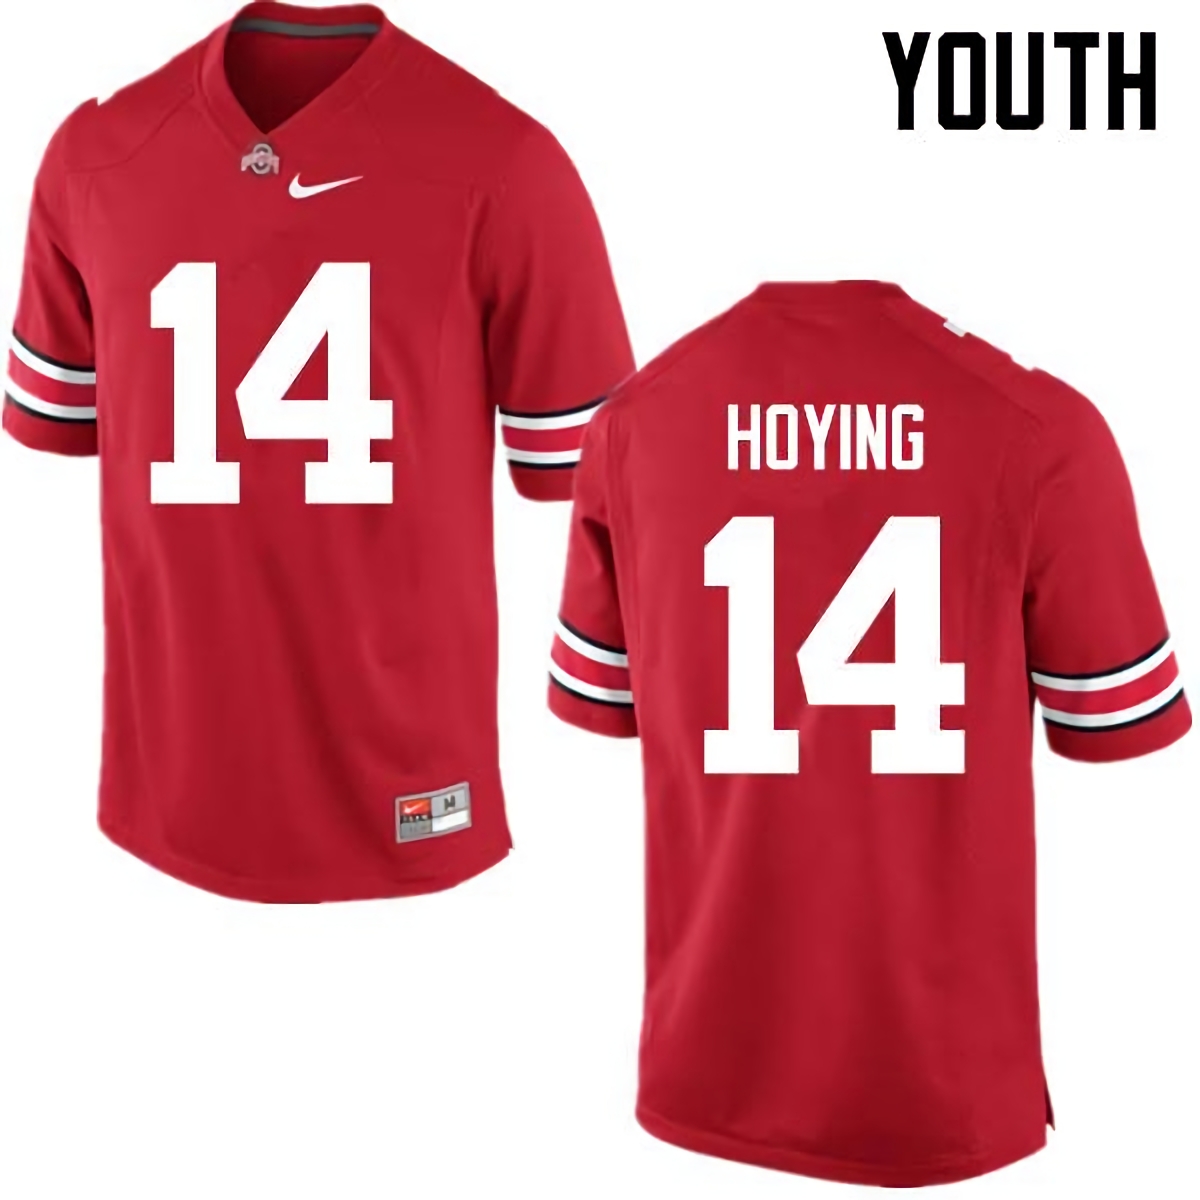 Bobby Hoying Ohio State Buckeyes Youth NCAA #14 Nike Red College Stitched Football Jersey BXL3556UR